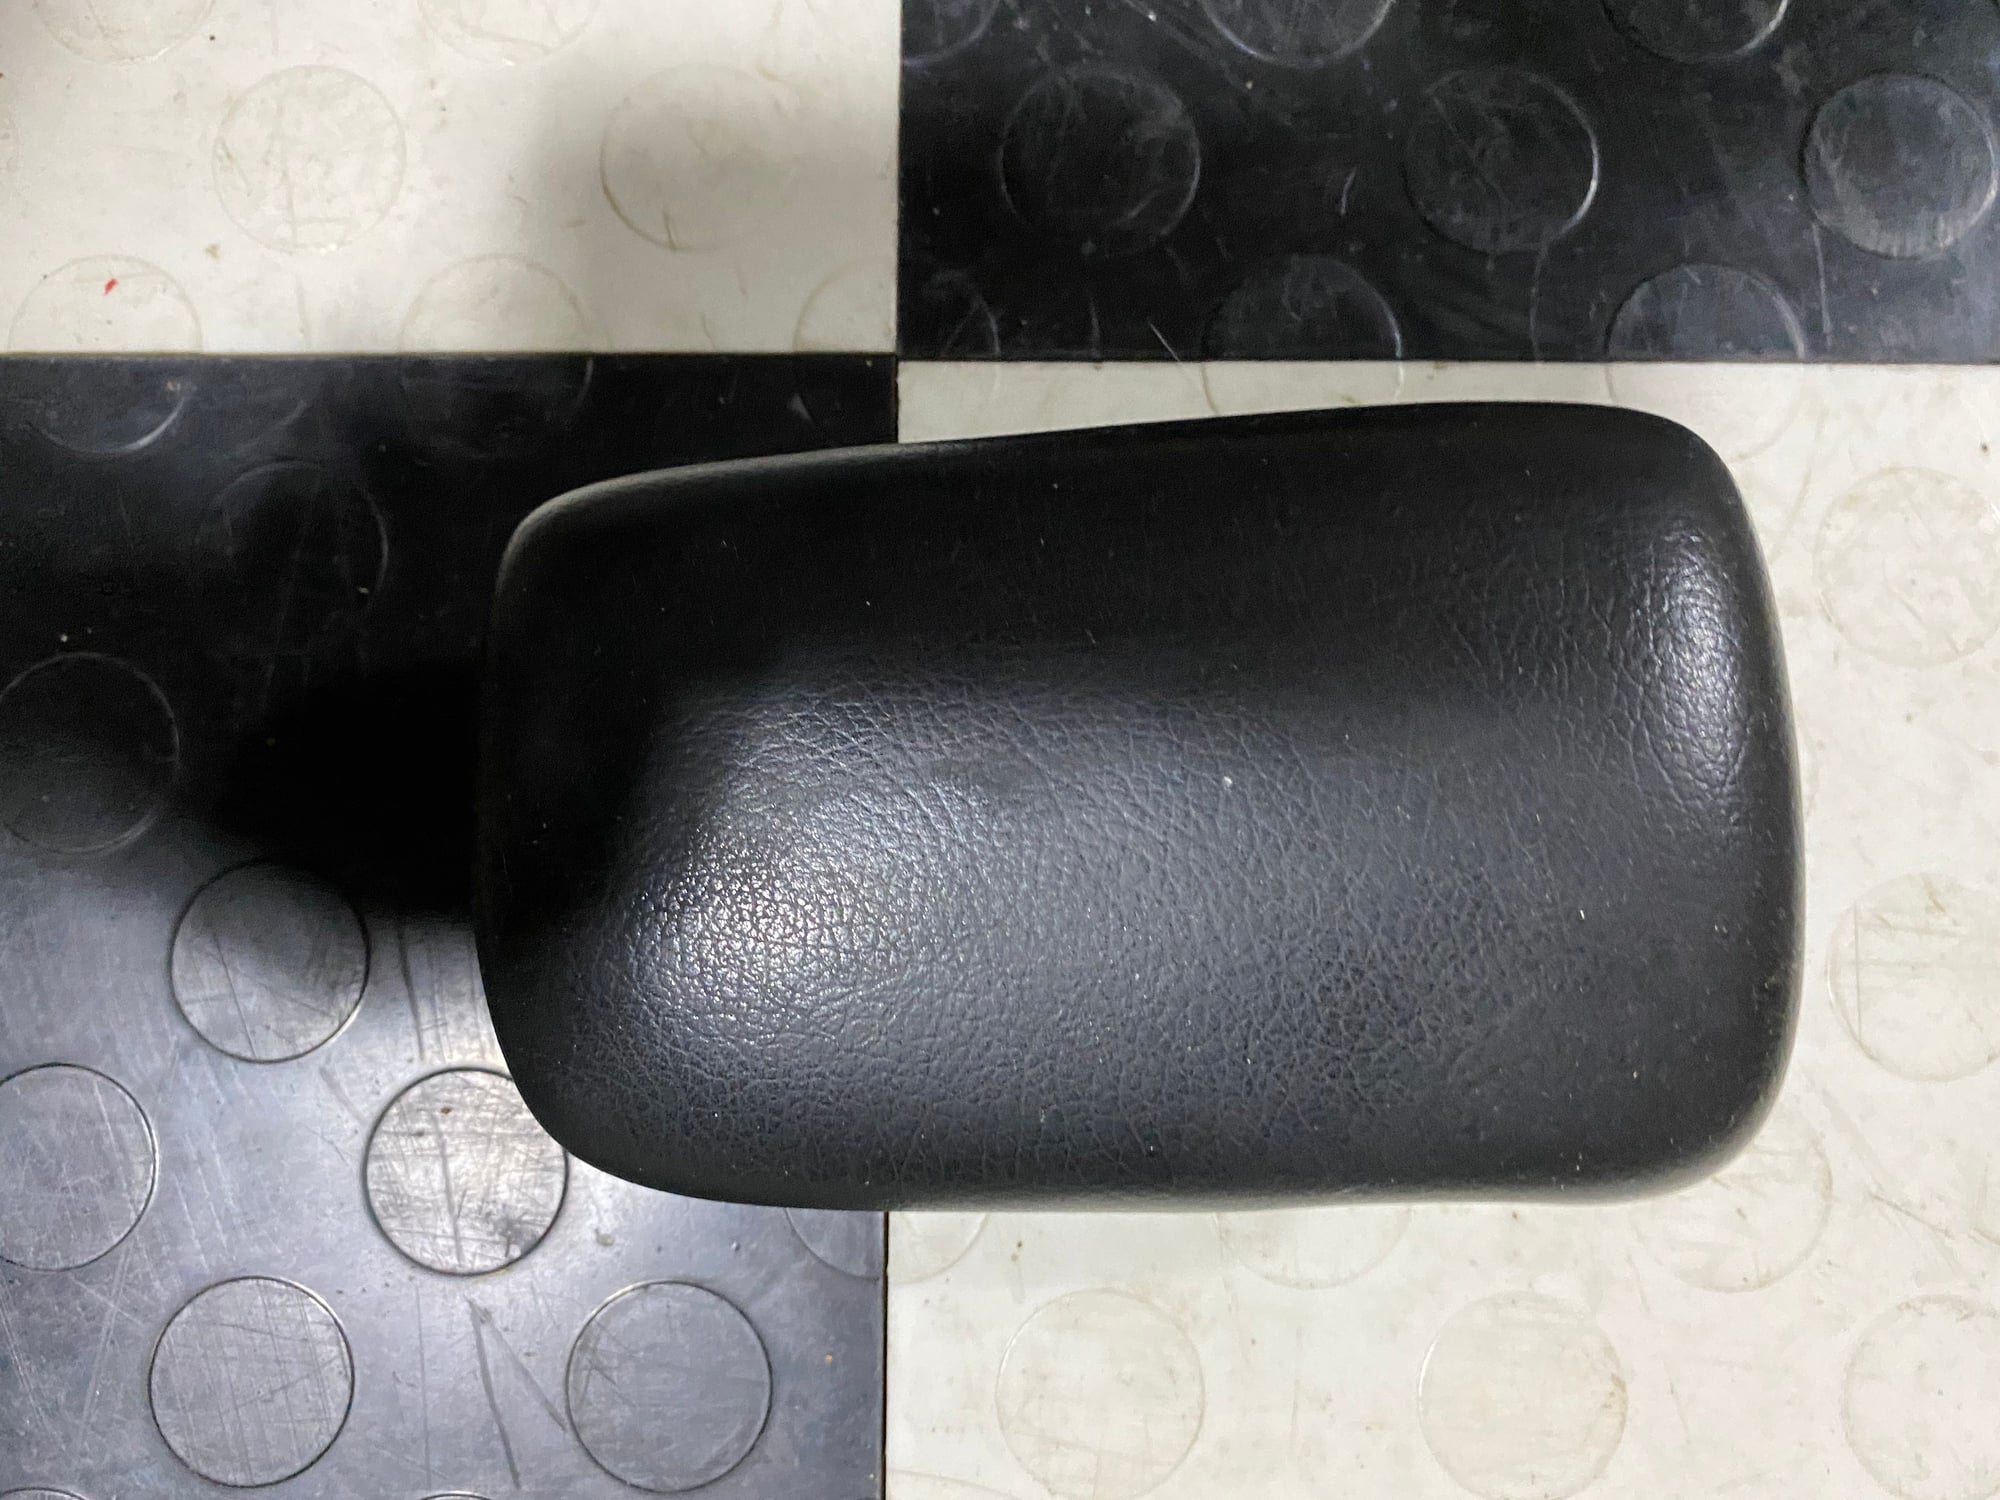 Interior/Upholstery - Center console arm rest - Used - 1993 to 1995 Mazda RX-7 - Lantana, TX 76226, United States